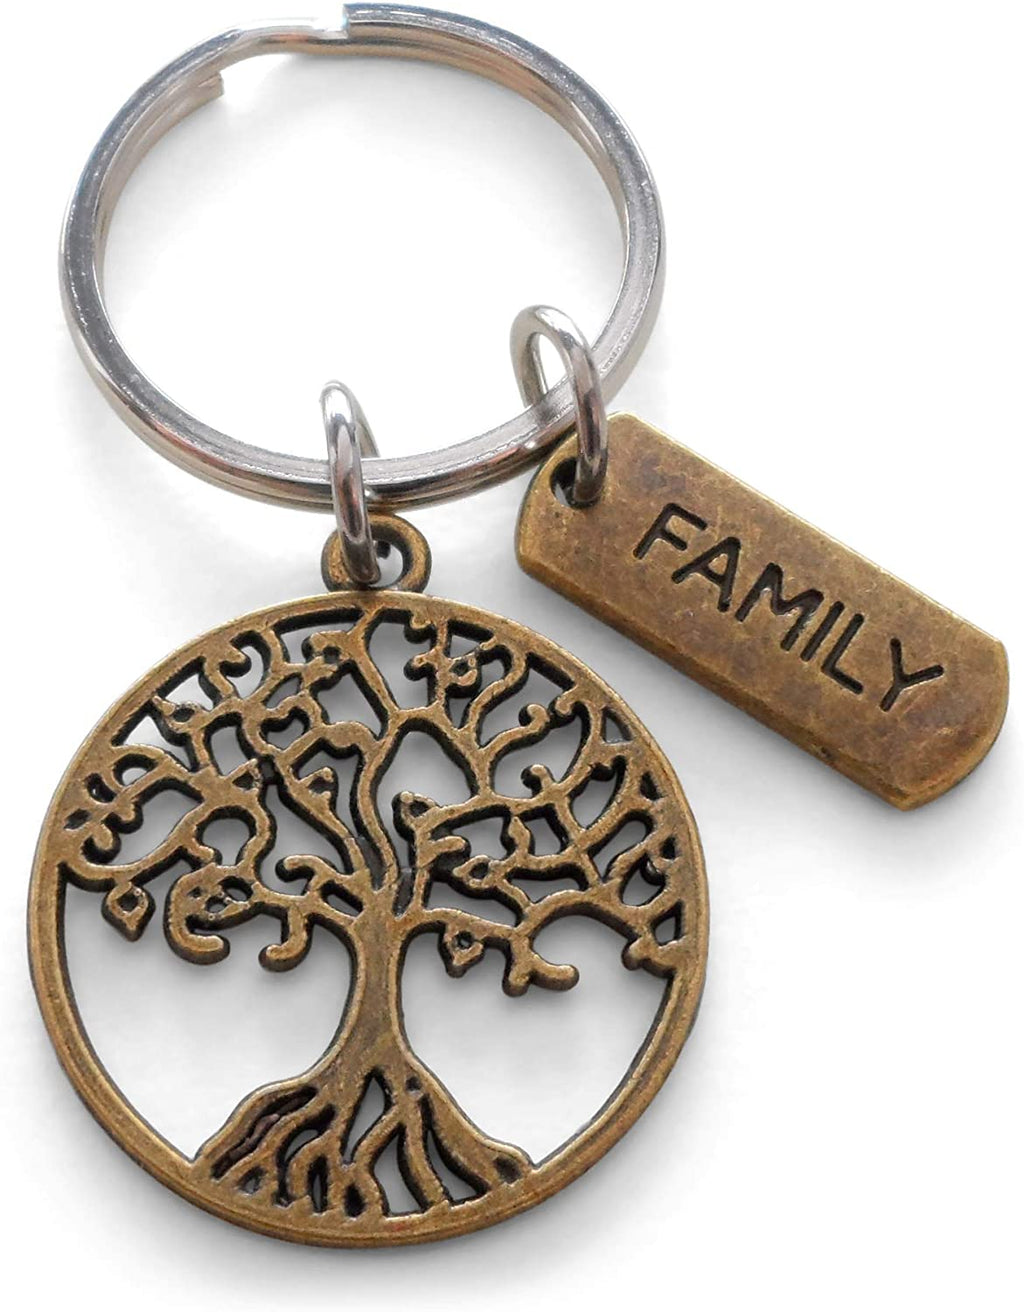 Family Reunion Gift • Bronze Family Tree Keychain w/ card "Our Roots Are As One"